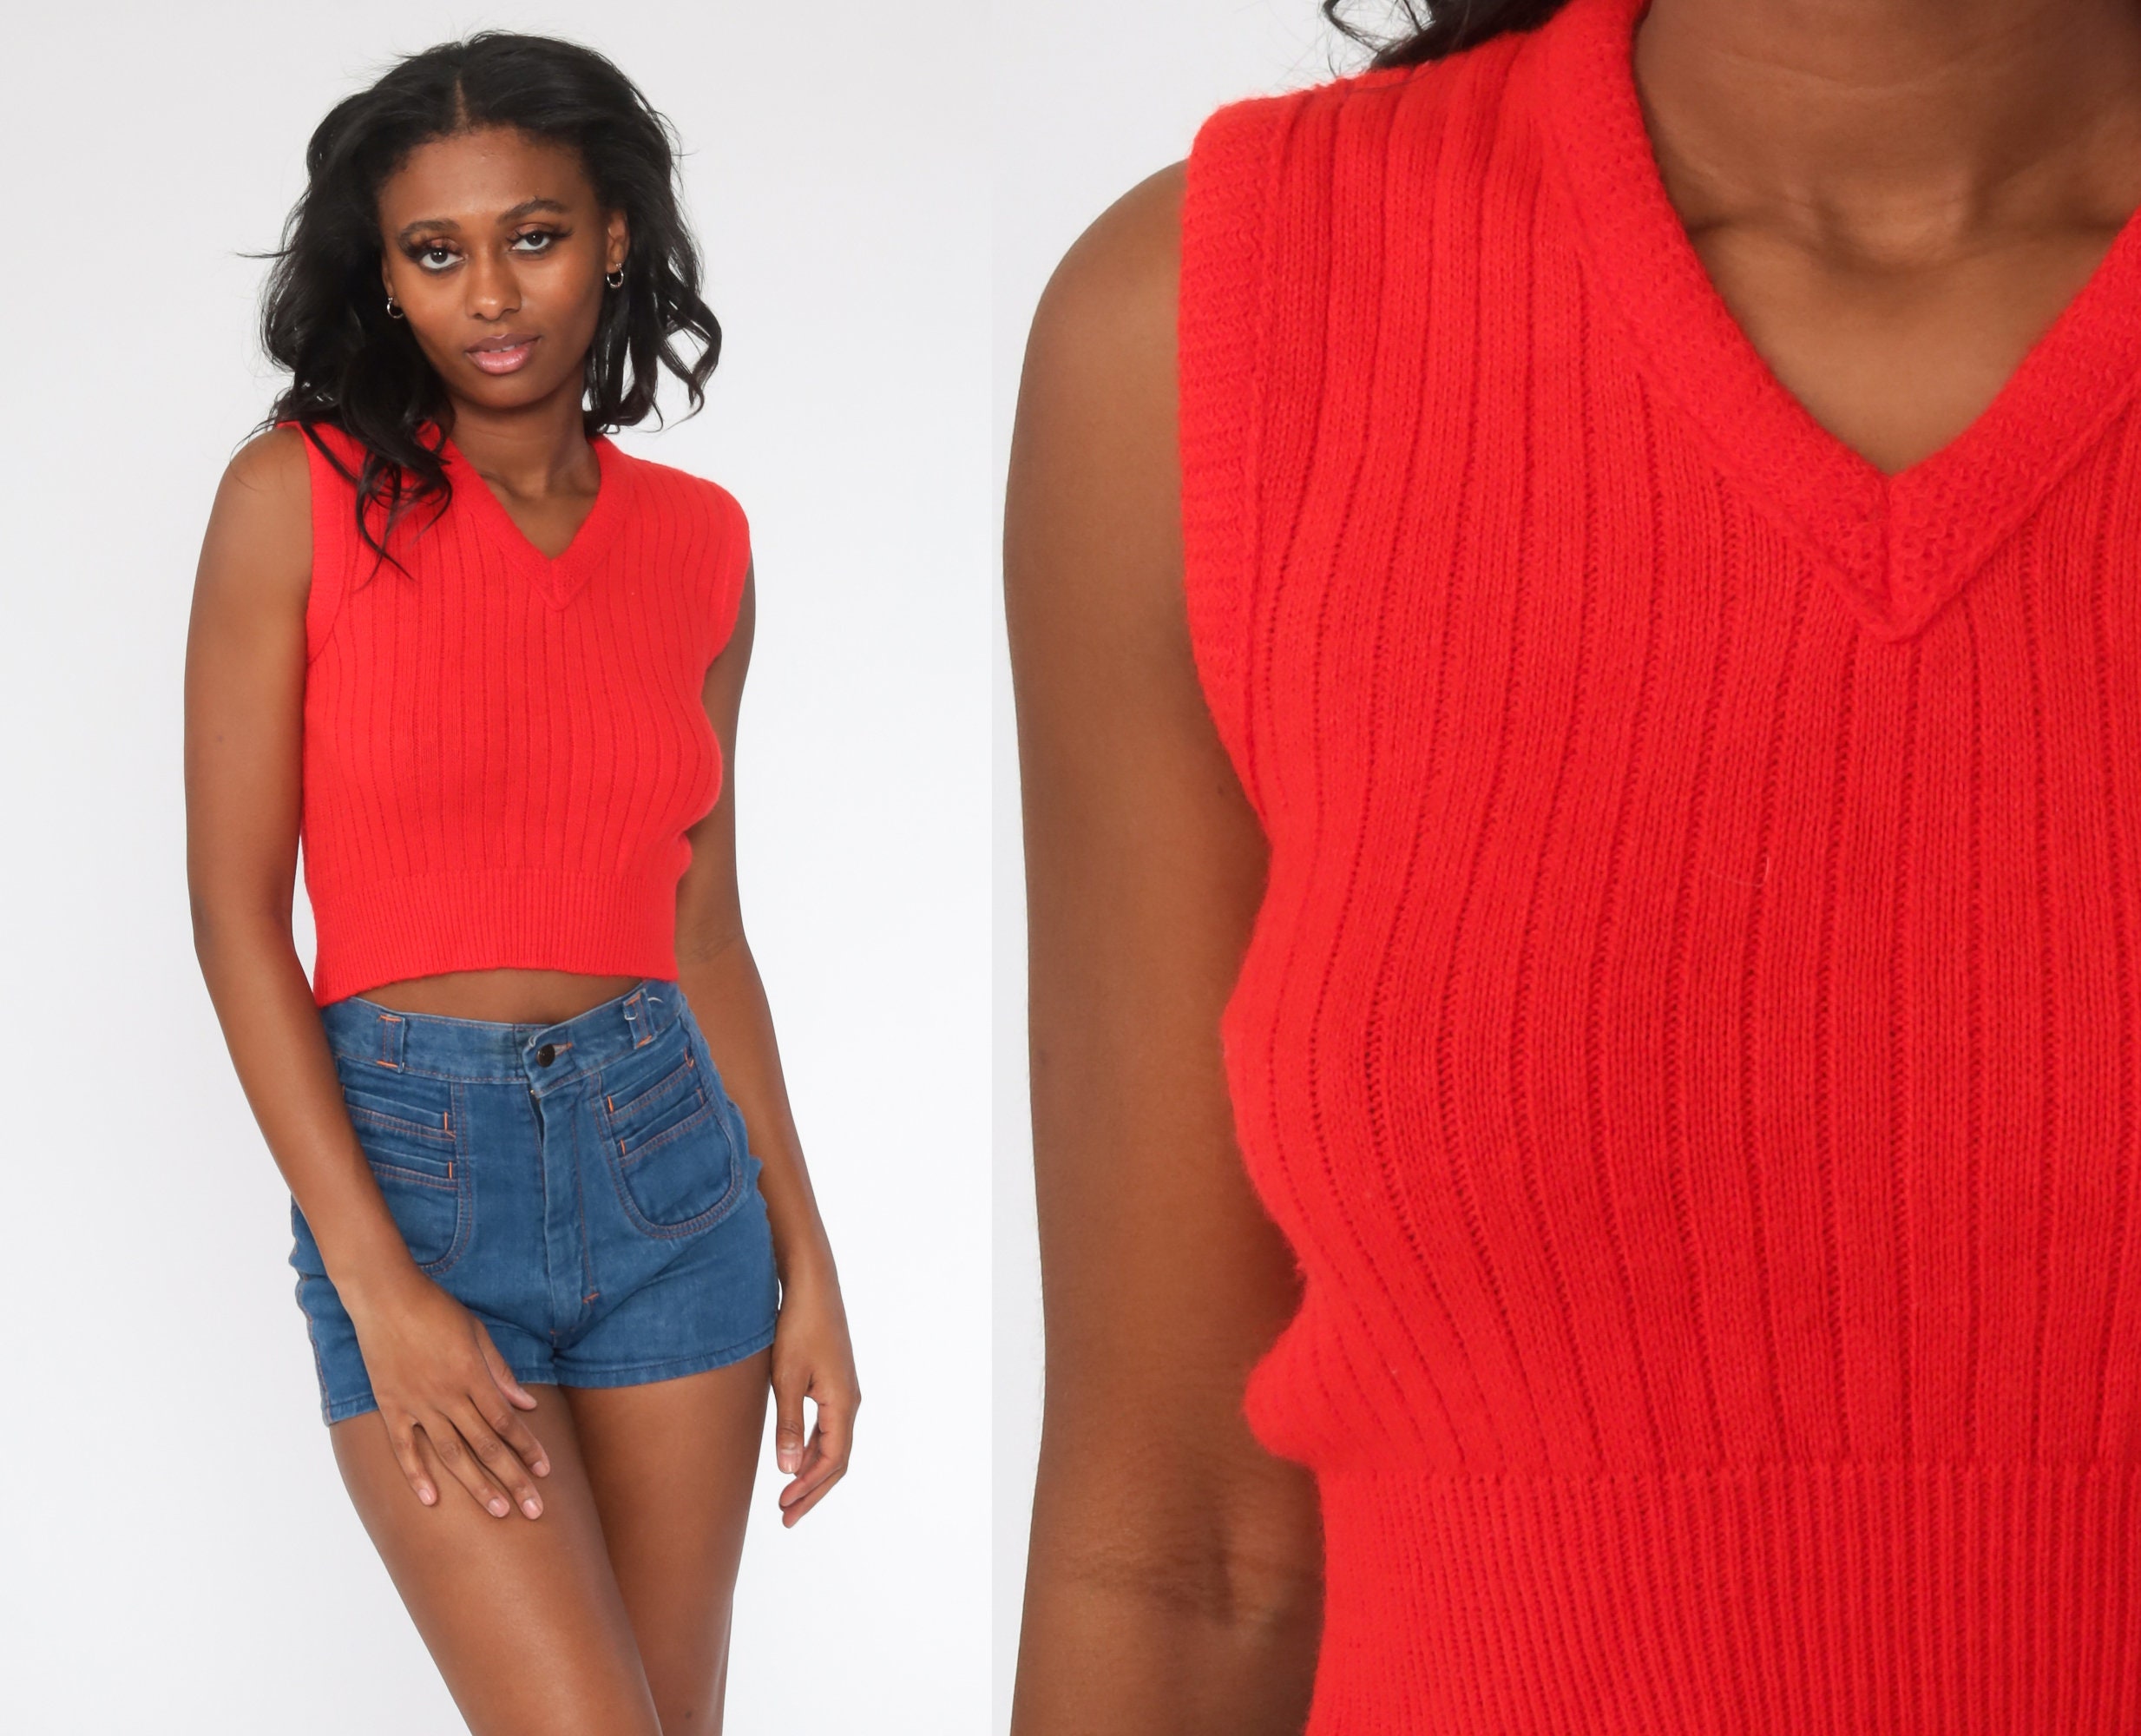 Red Vest Top 70s Knit Top Sleeveless Nerd 80s Boho V Neck Knit Shirt Crop Top Sleeveless Hippie Vintage Extra Small xs s